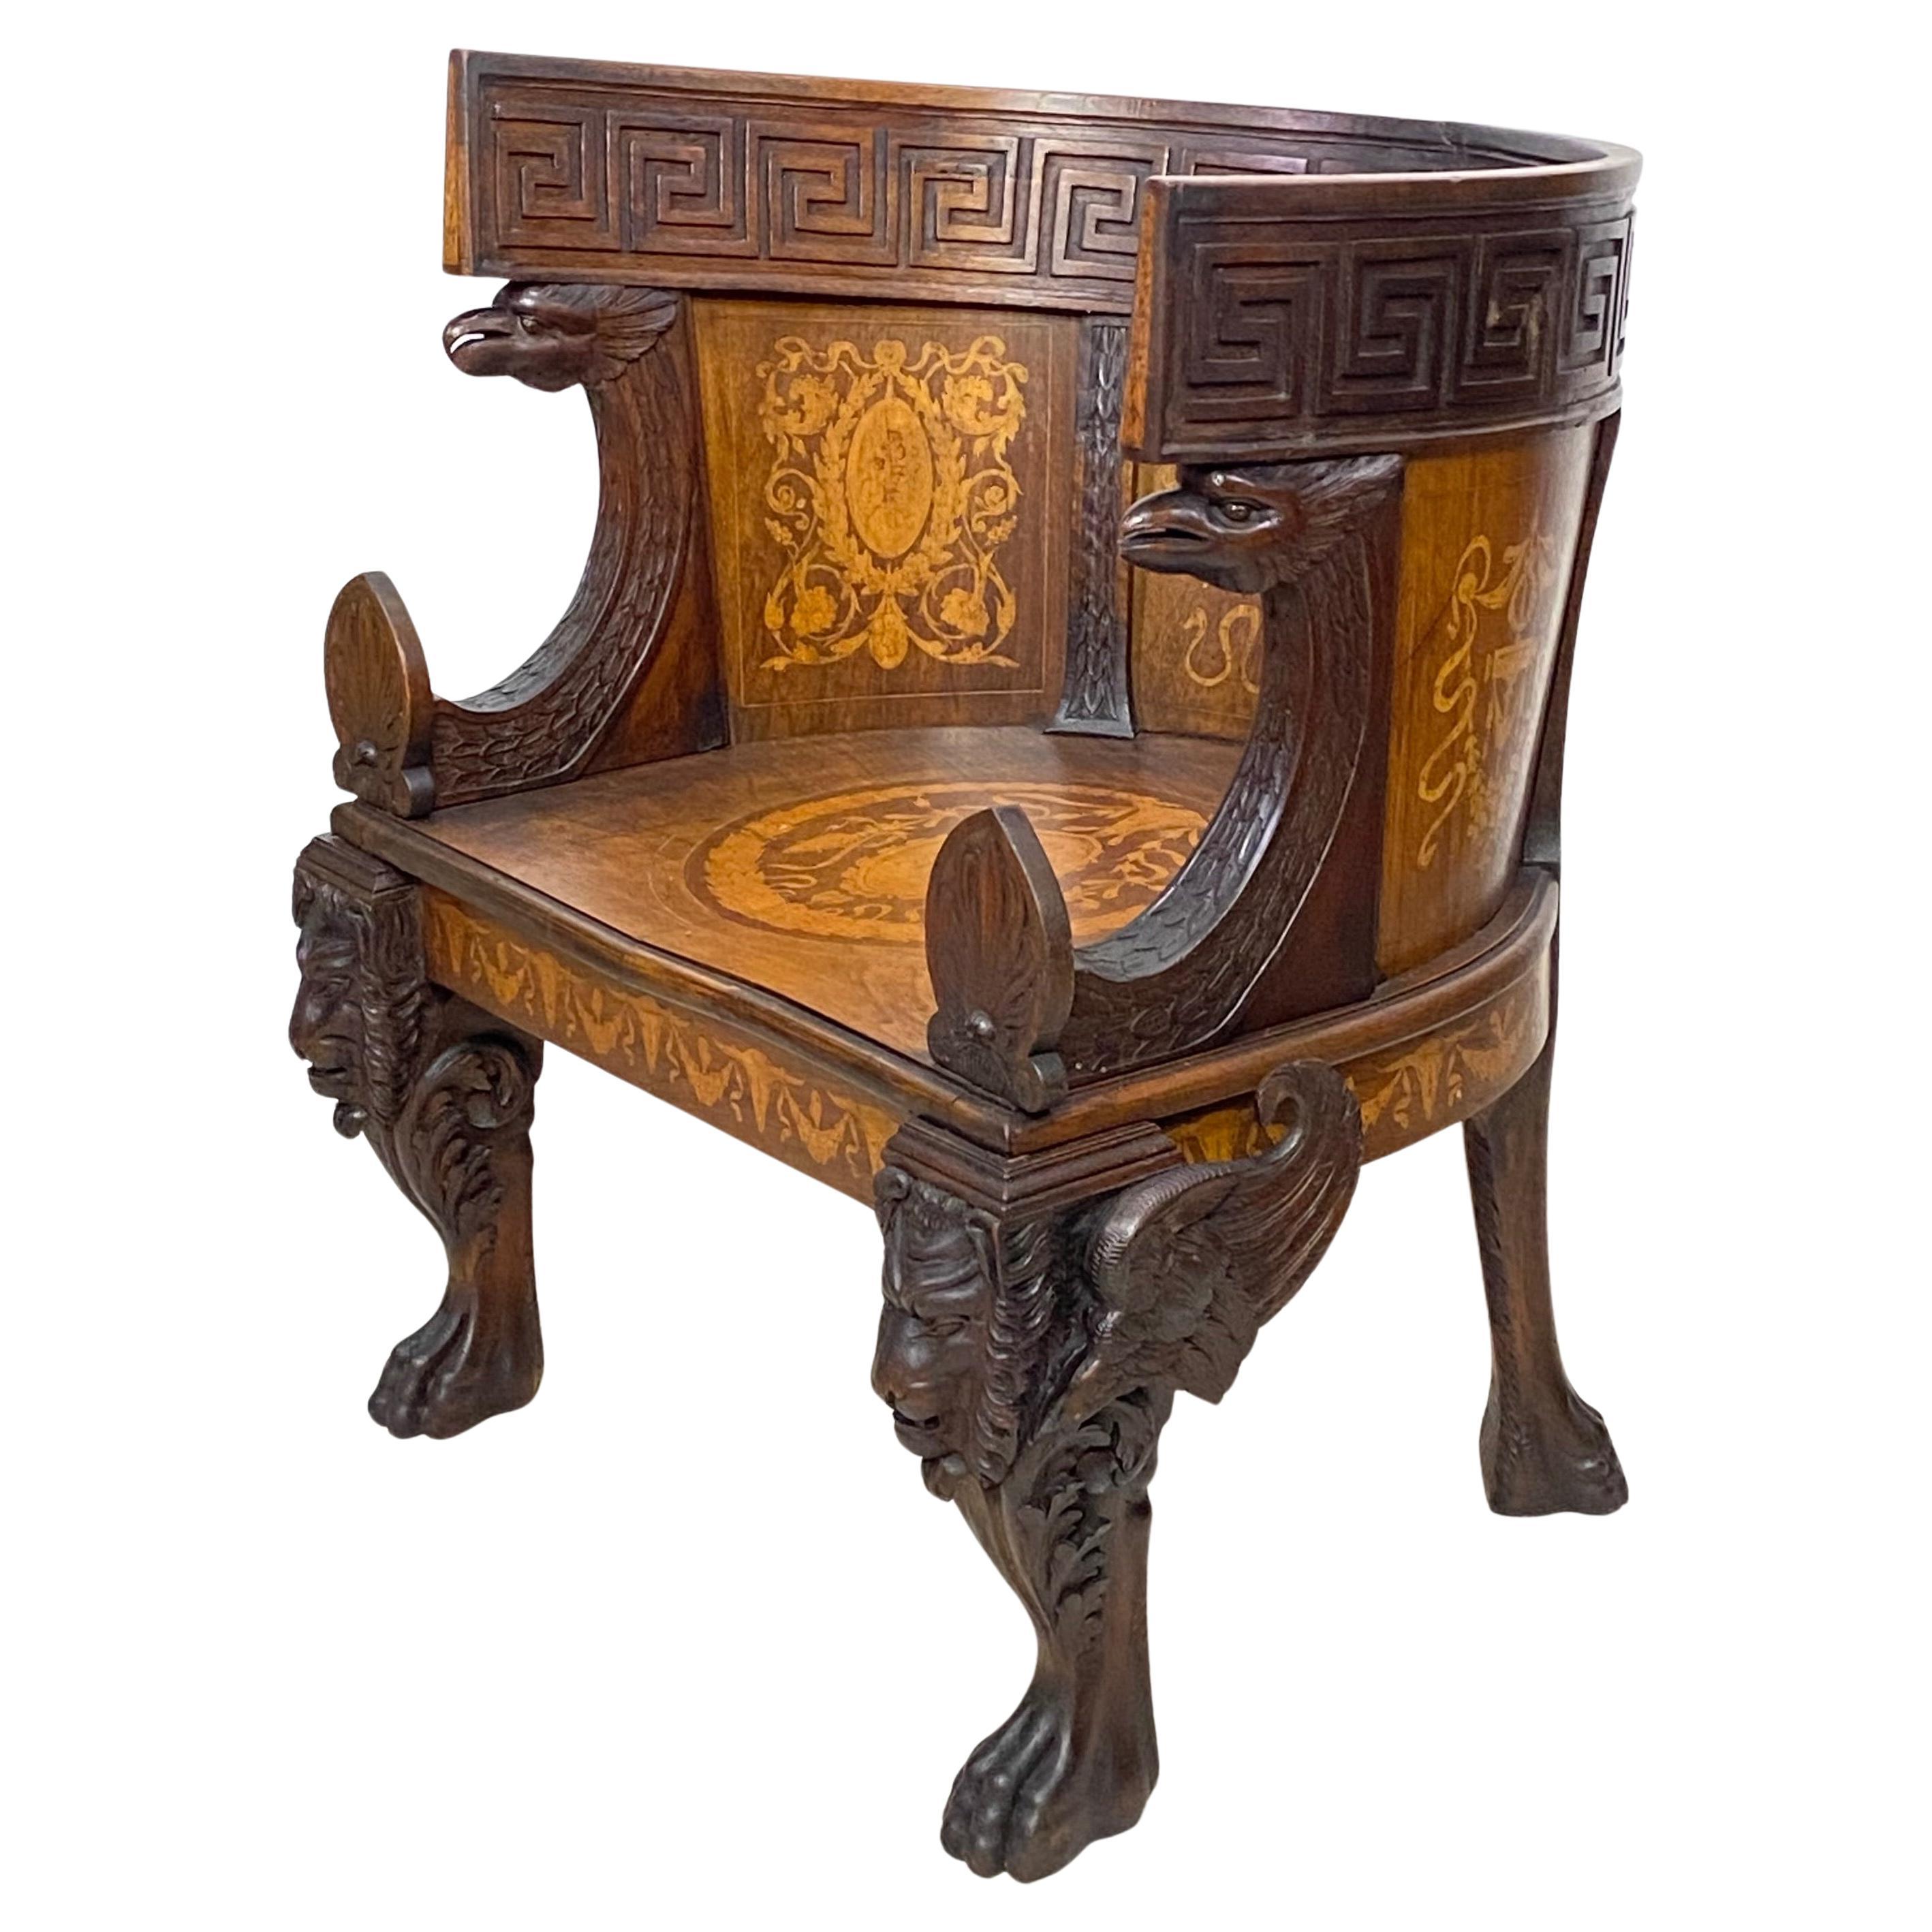 Neoclassical Revival Grand Tour Period Walnut Chair, Italian 19th Century For Sale